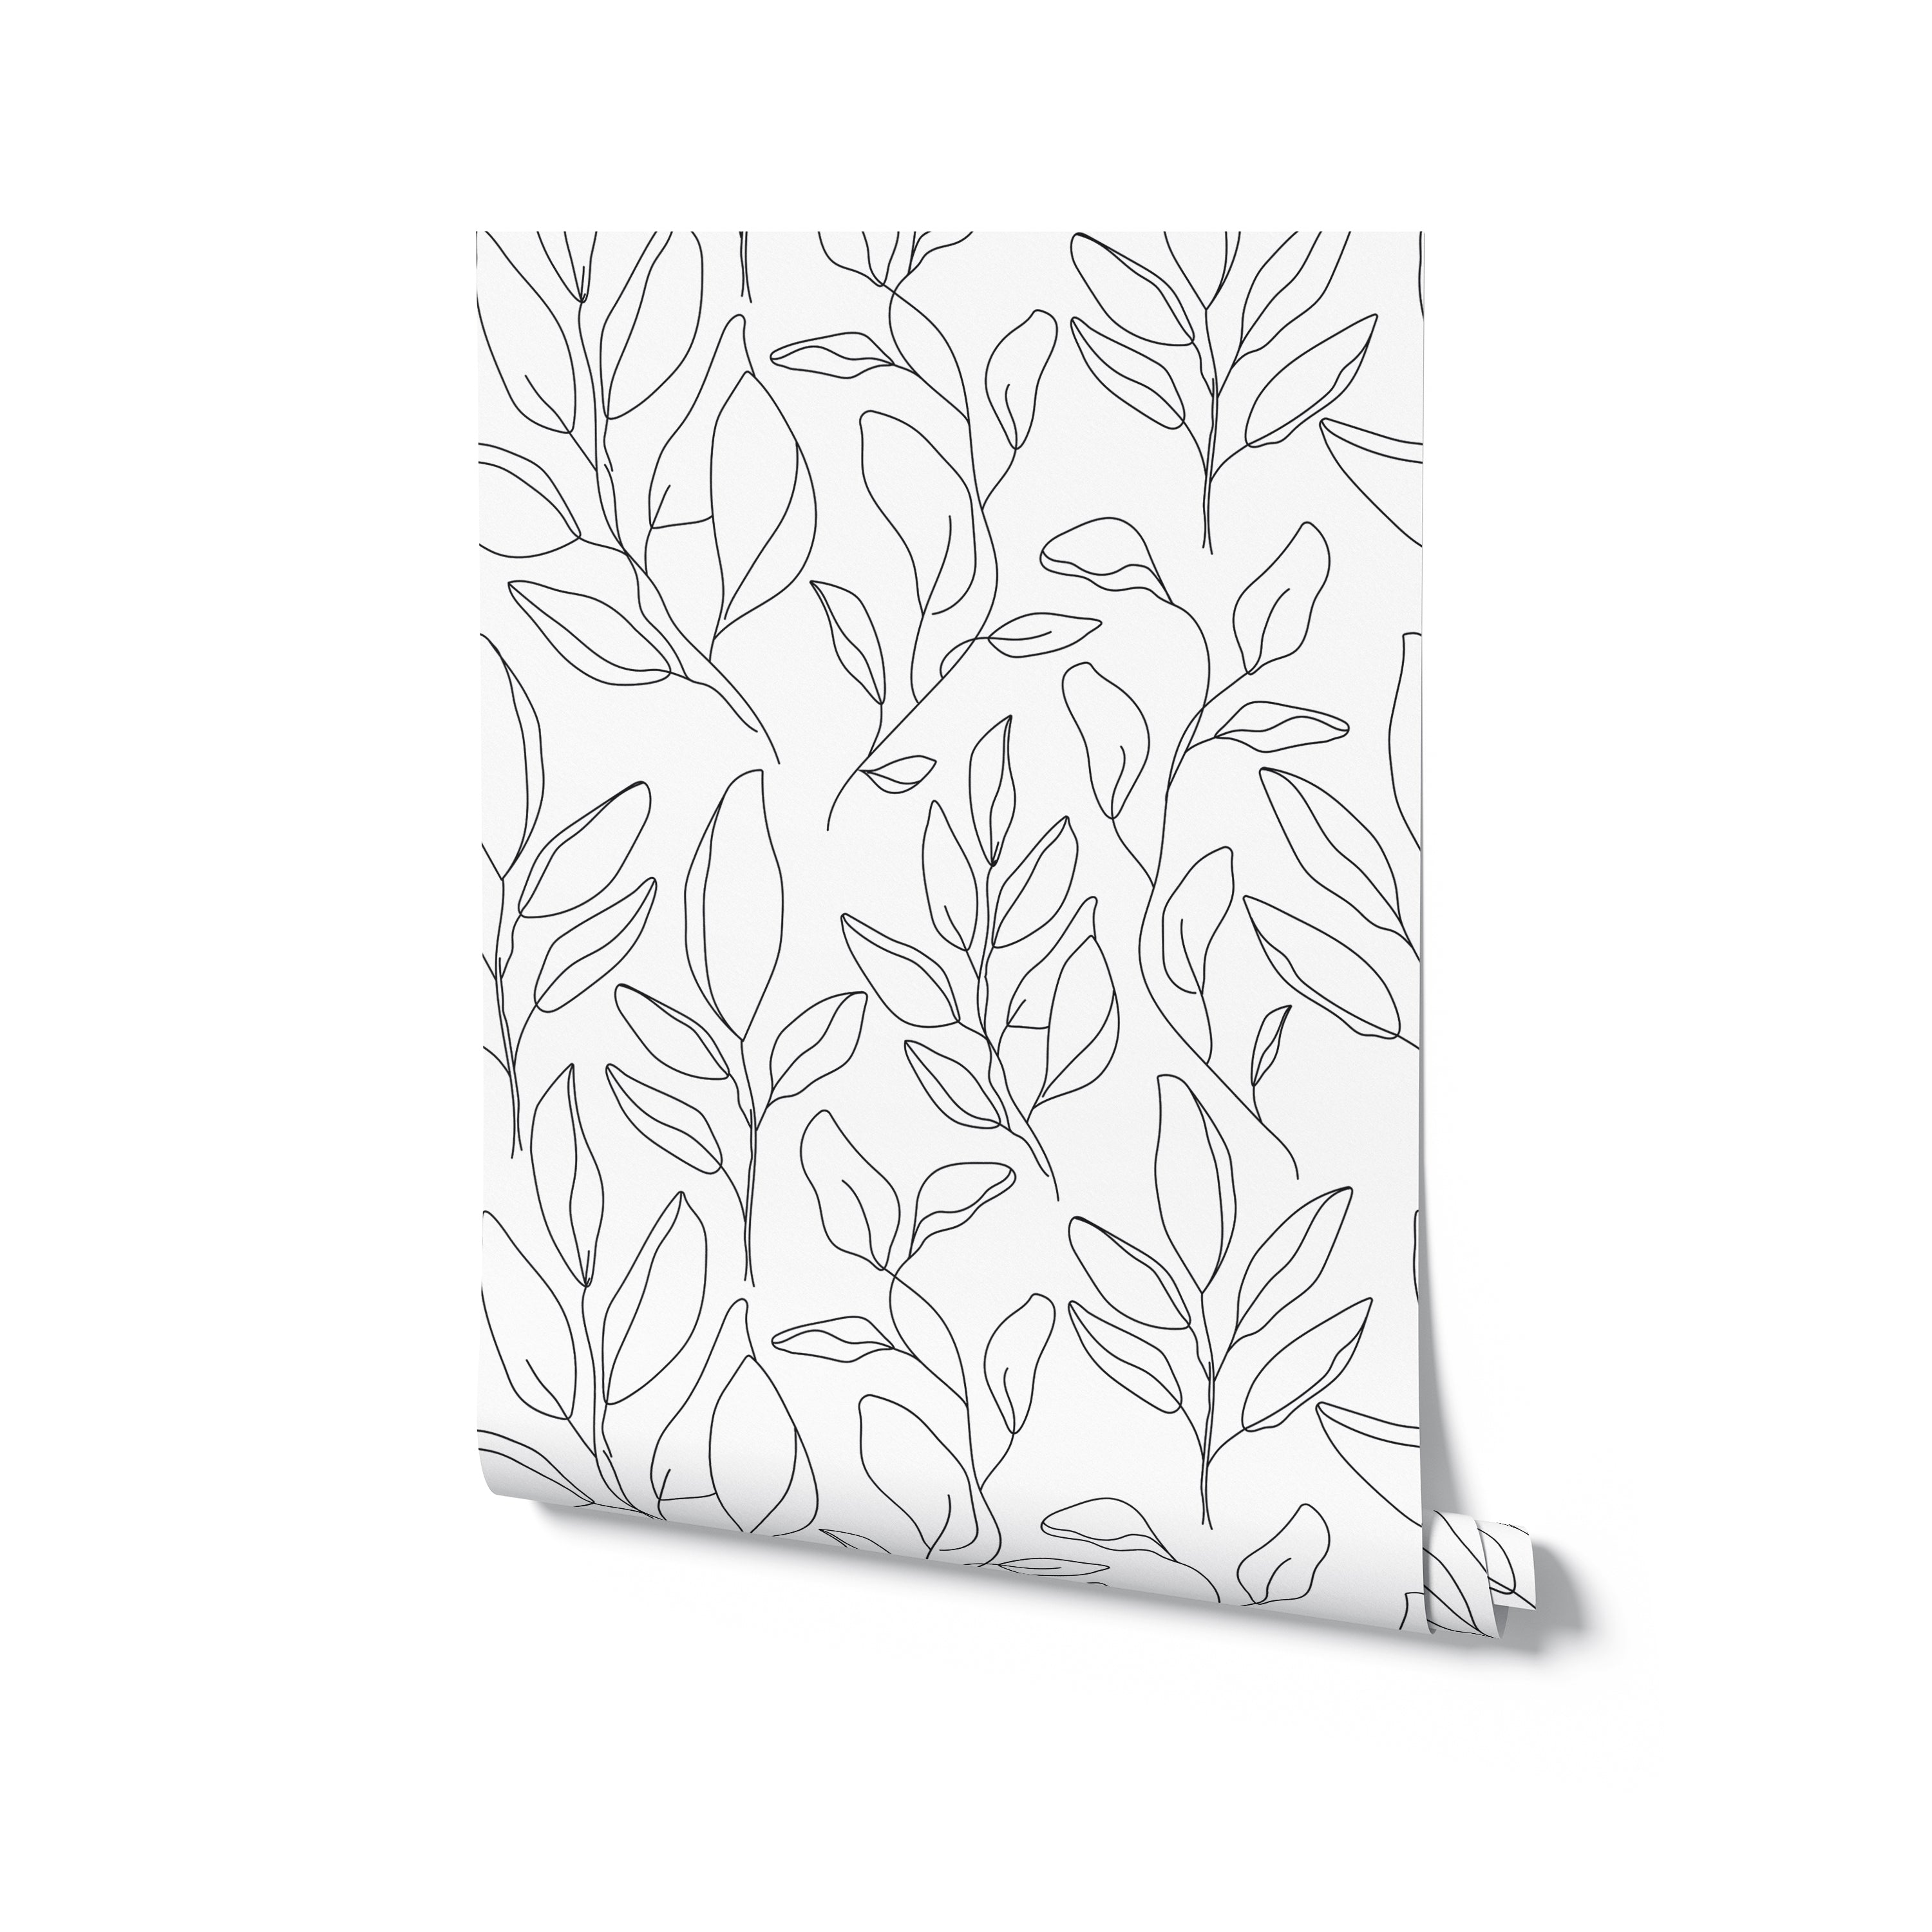 A mockup of a roll of Black Floral Wallpaper, showing the intricate black line art design of leaves on a crisp white background.